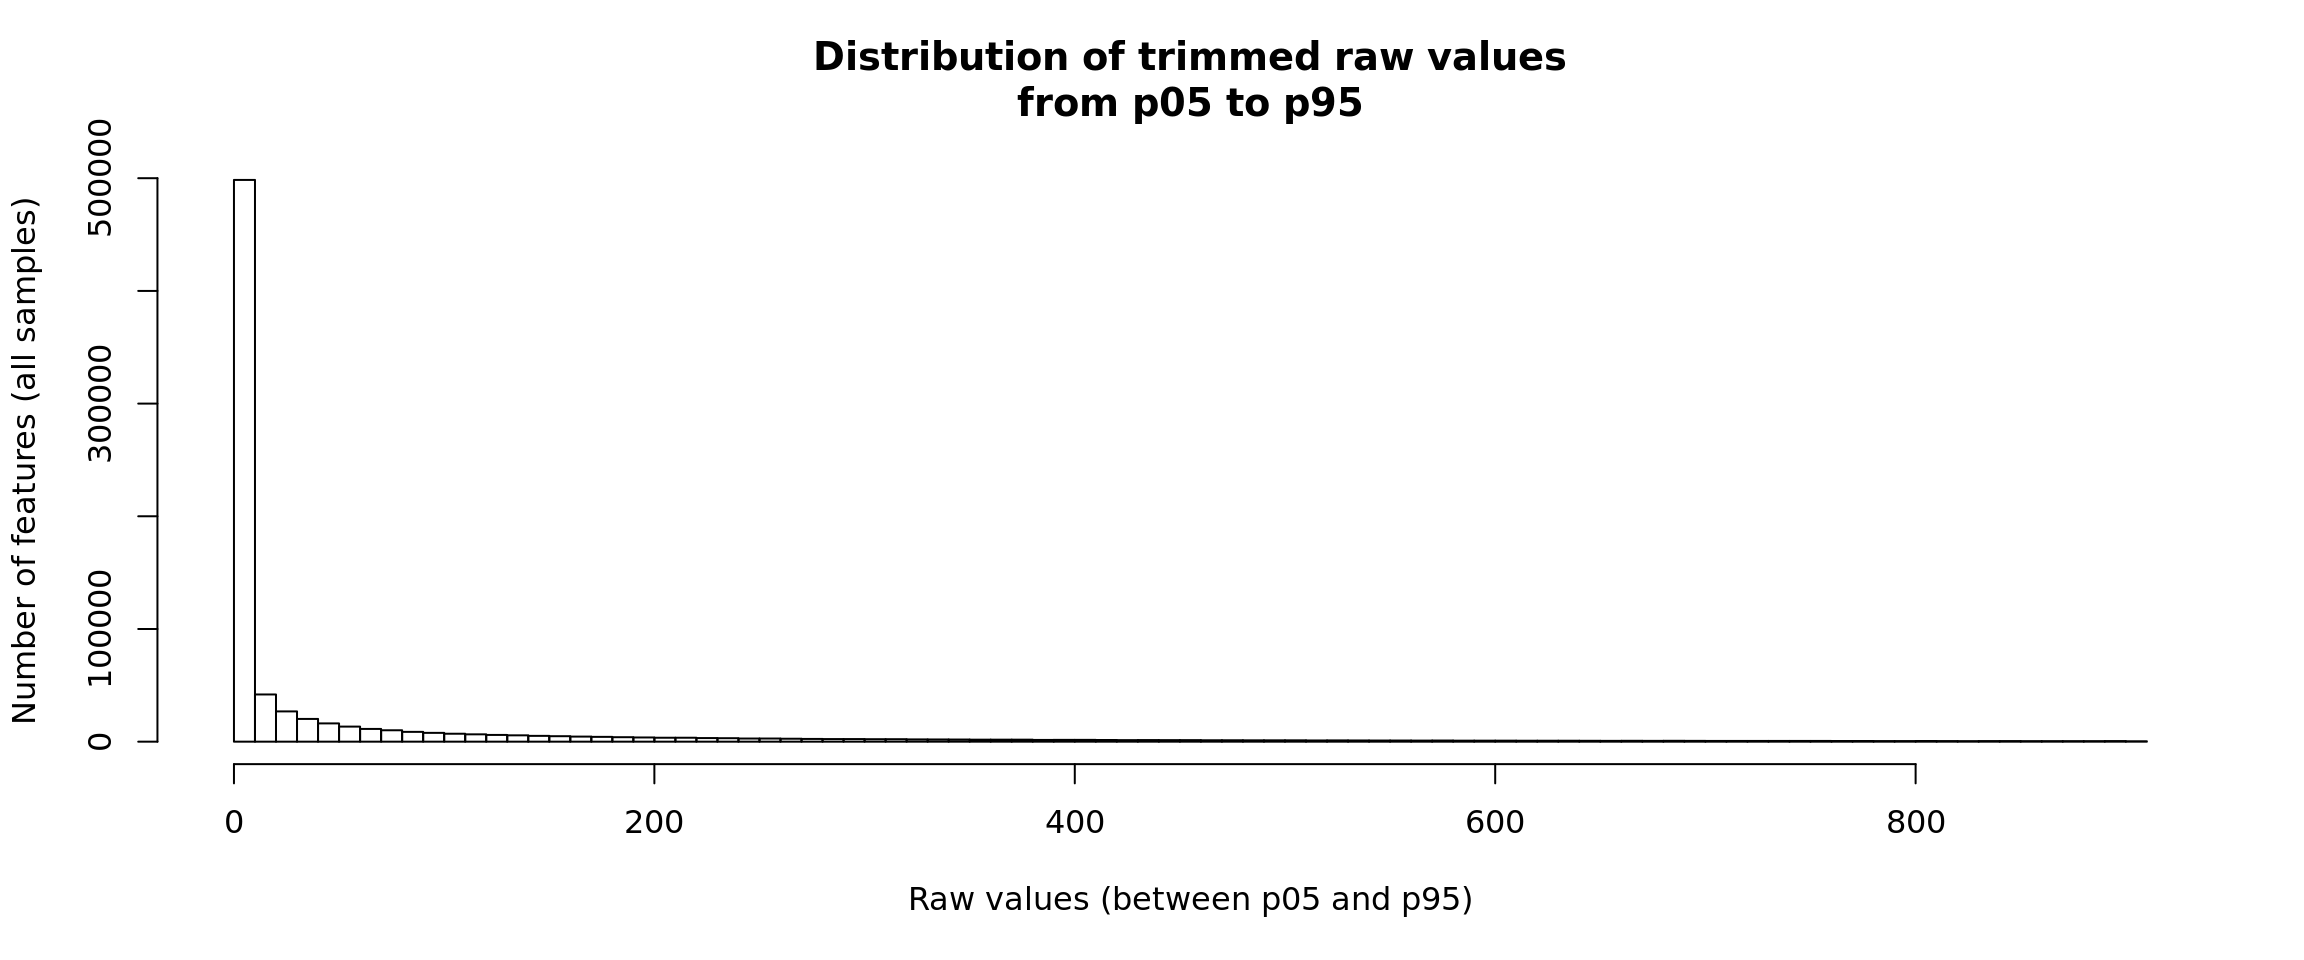 Distribution of raw counts